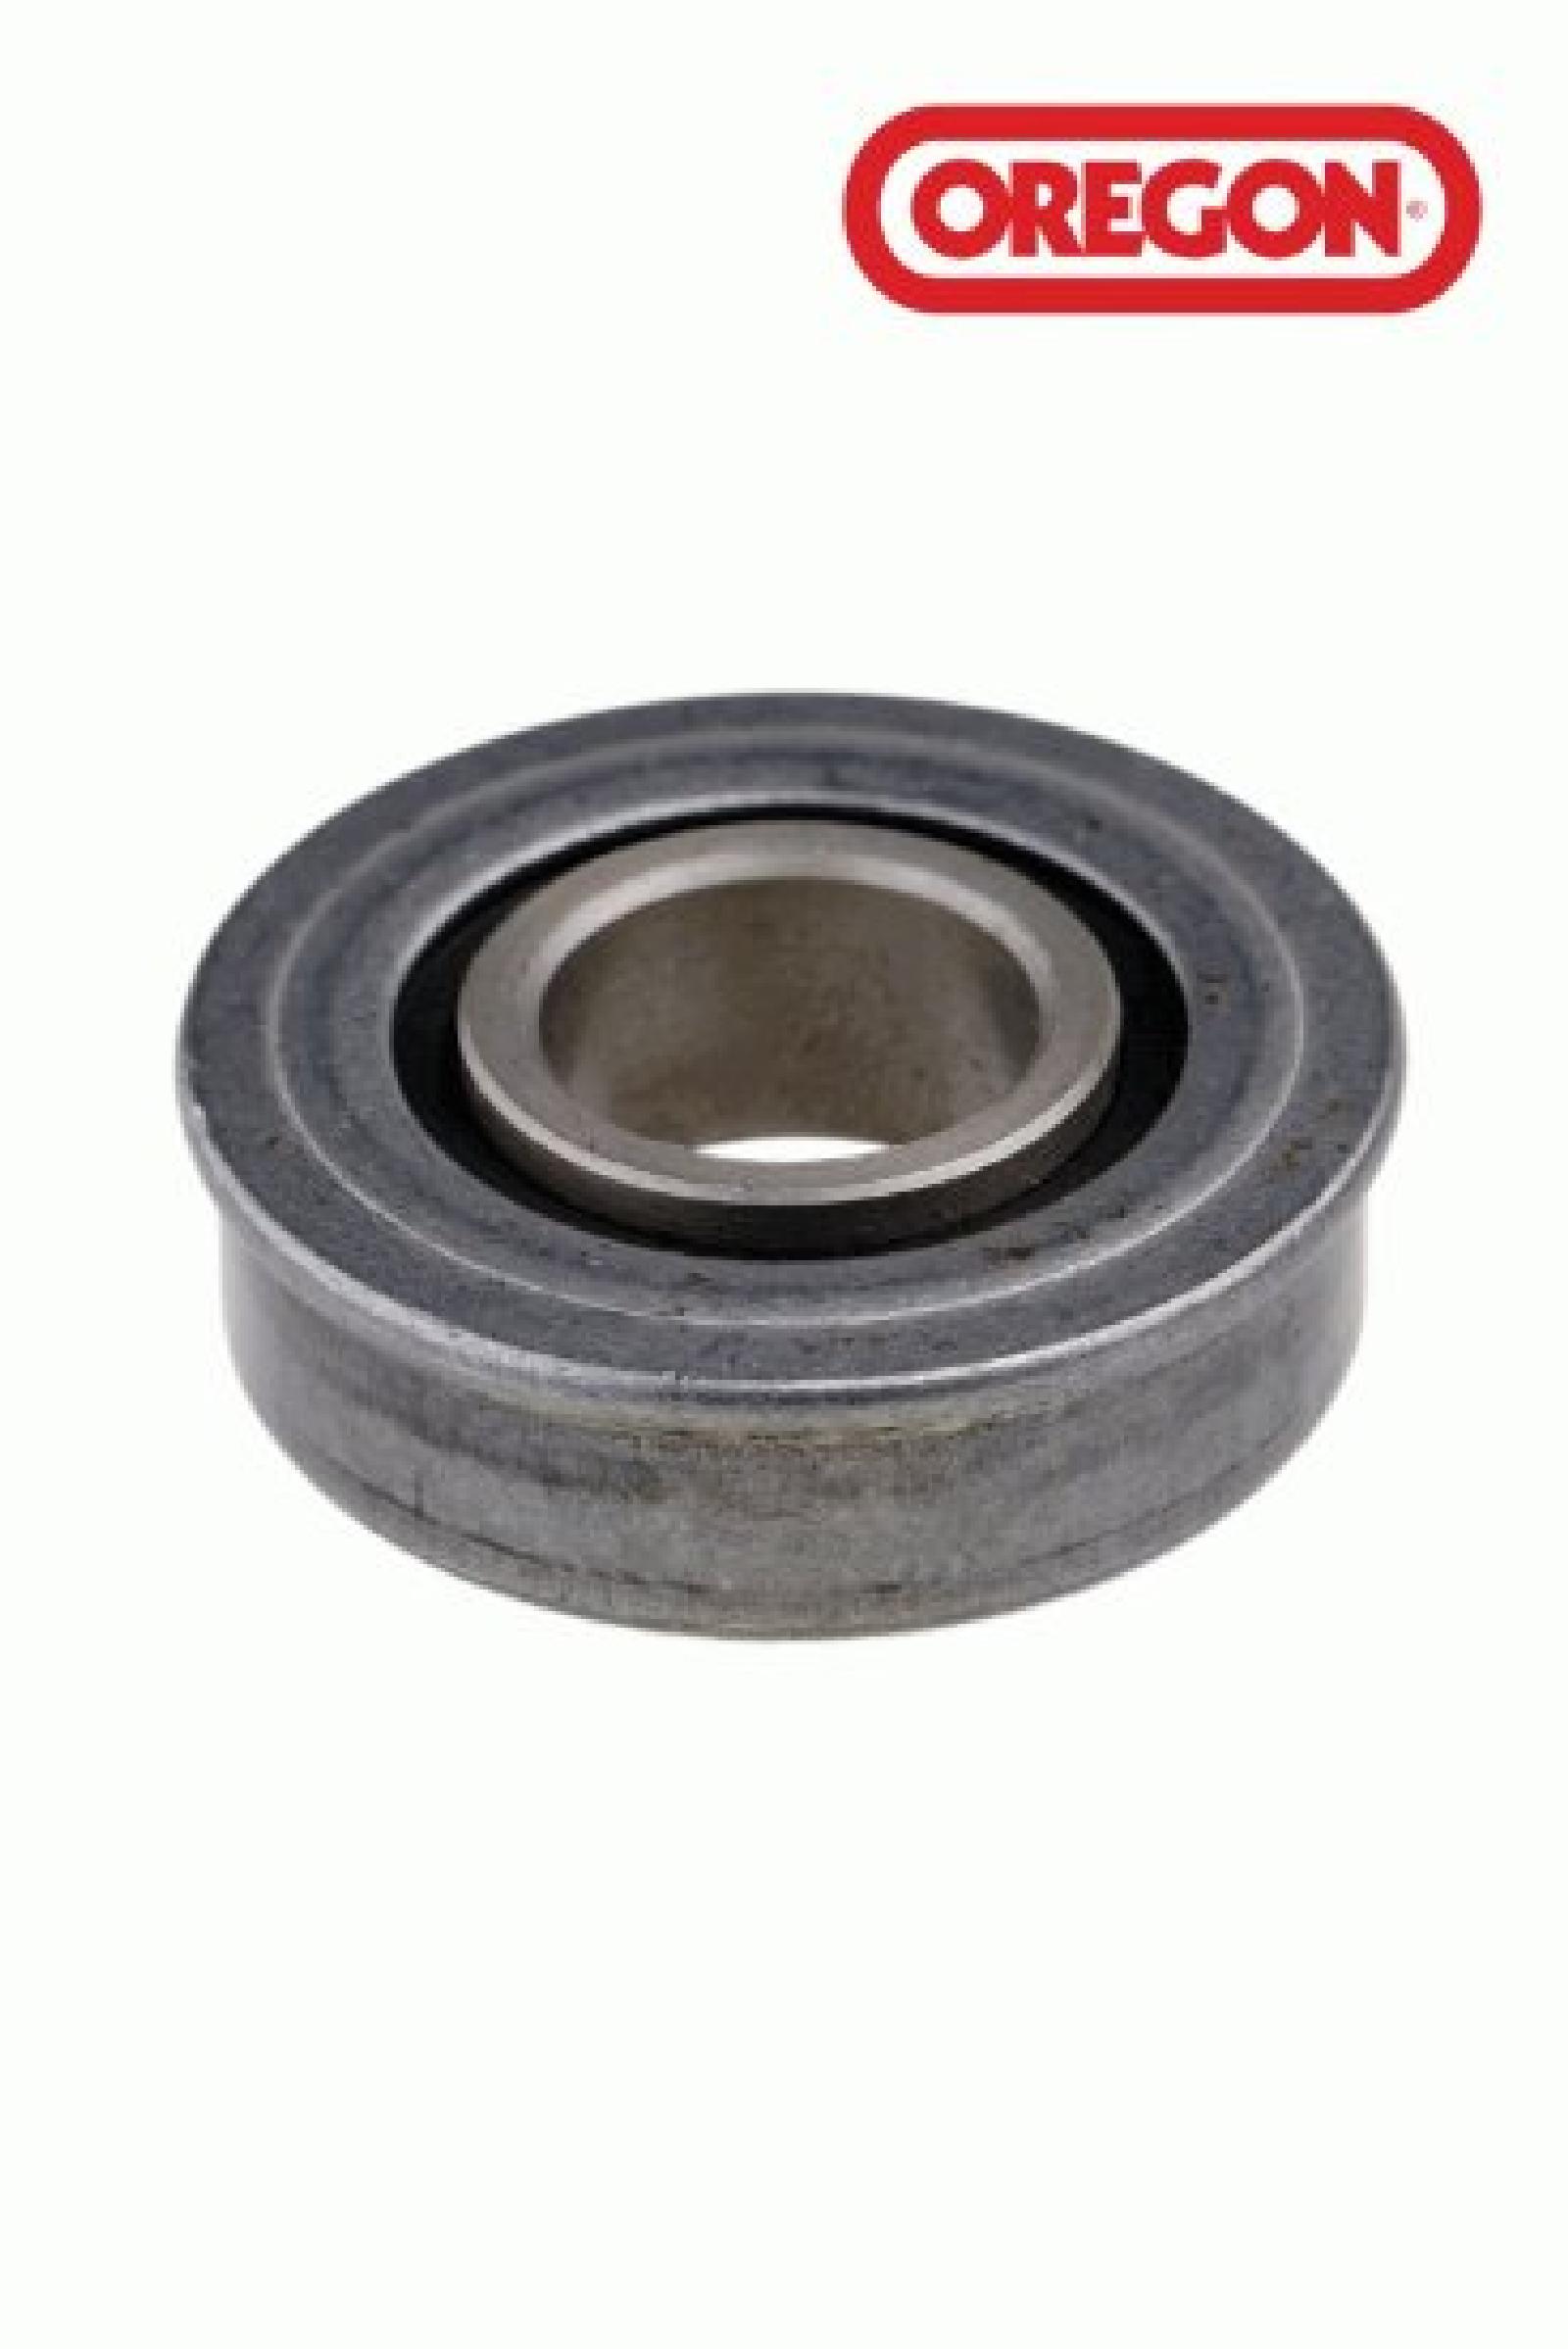 BEARING, RLR 3/4IN X 1/2I part# 45-064 by Oregon - Click Image to Close